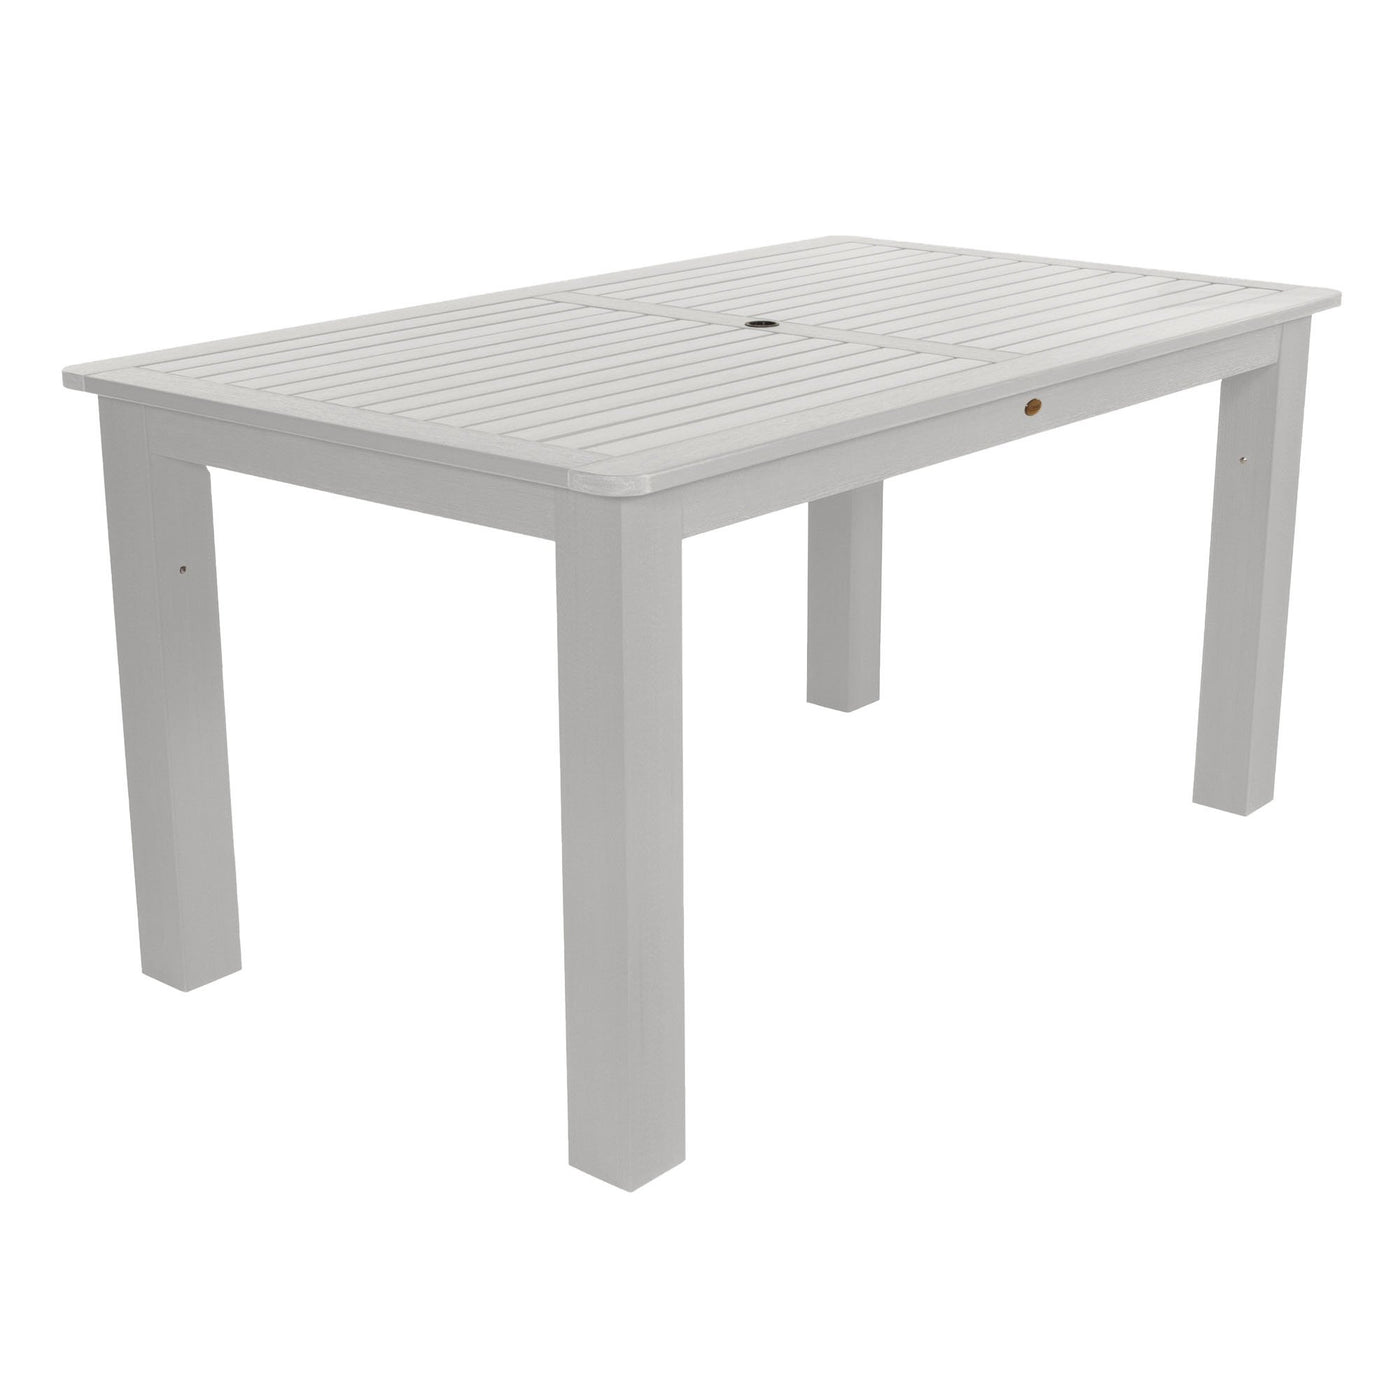 Rectangular 42in x 72in Outdoor Dining Table - Counter Height Dining Highwood USA White 